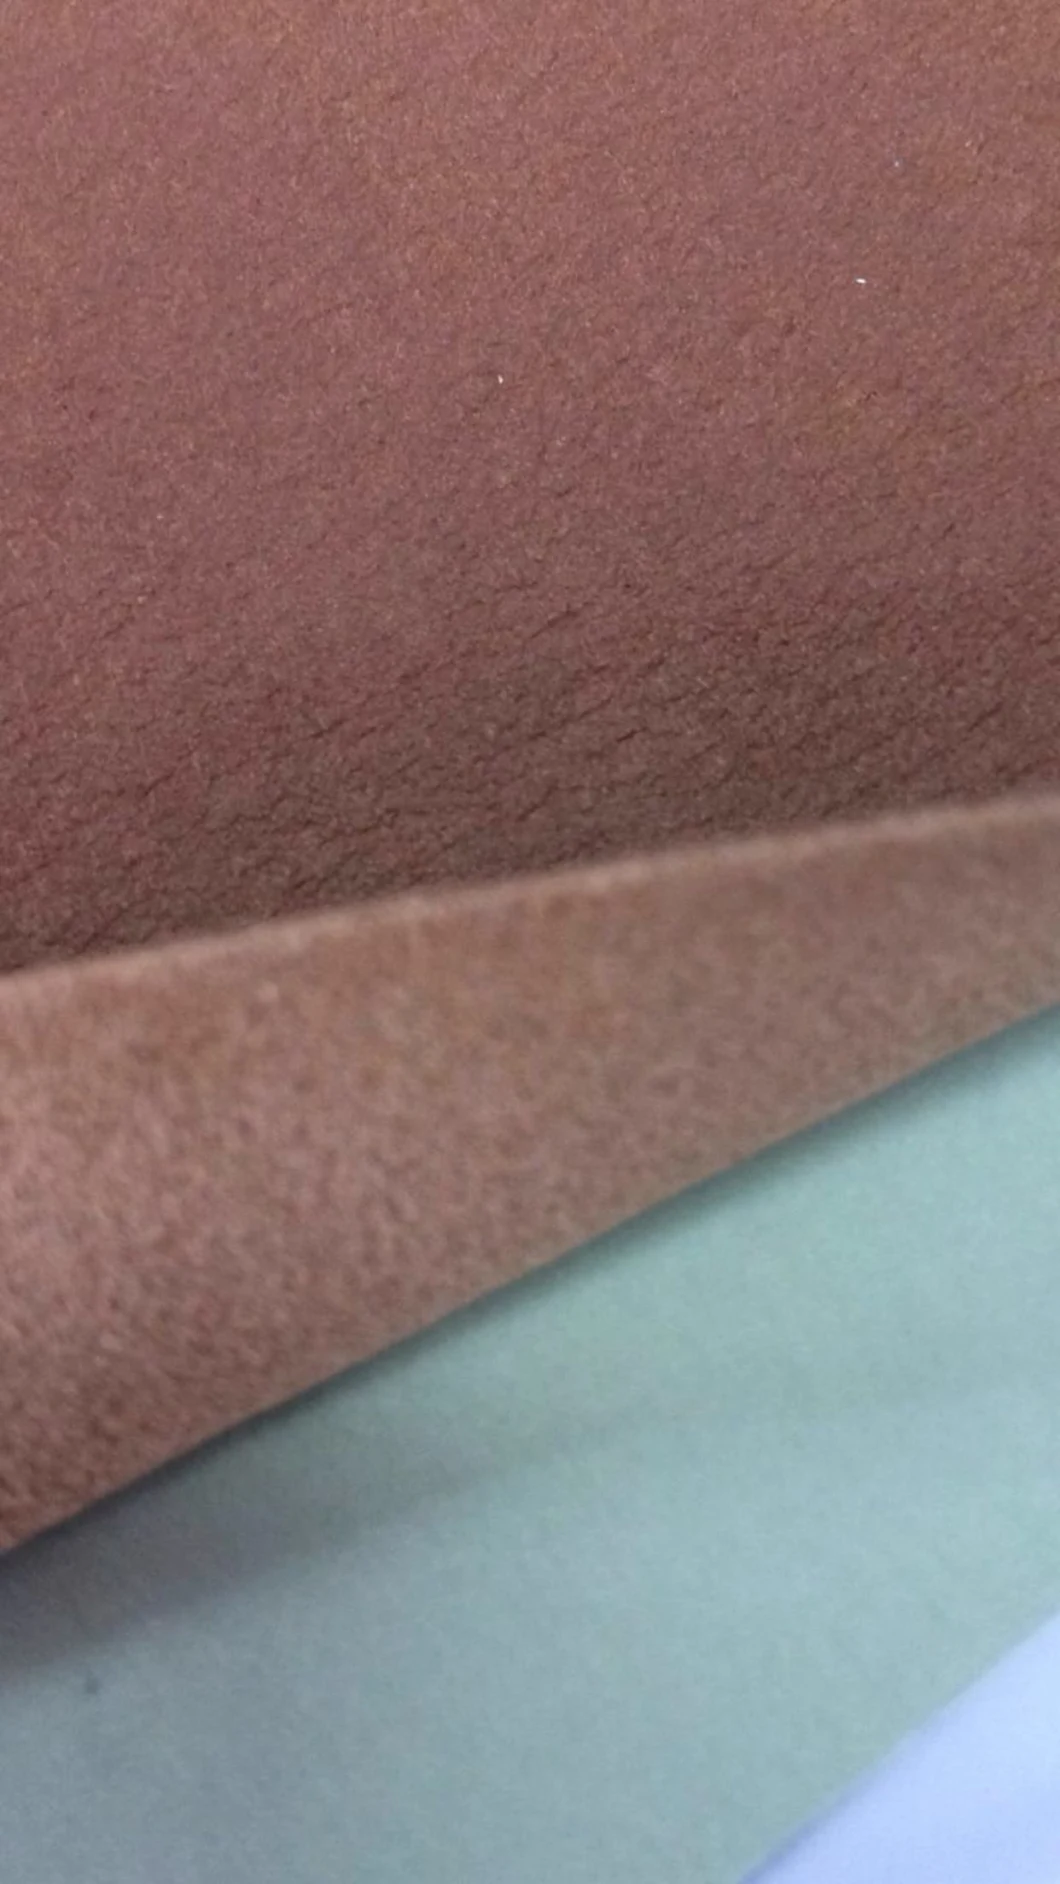 Orthopedic Shoes Nonwoven PU Lining Microfiber Water Absorbent Microfiber Leather Shoes Insole